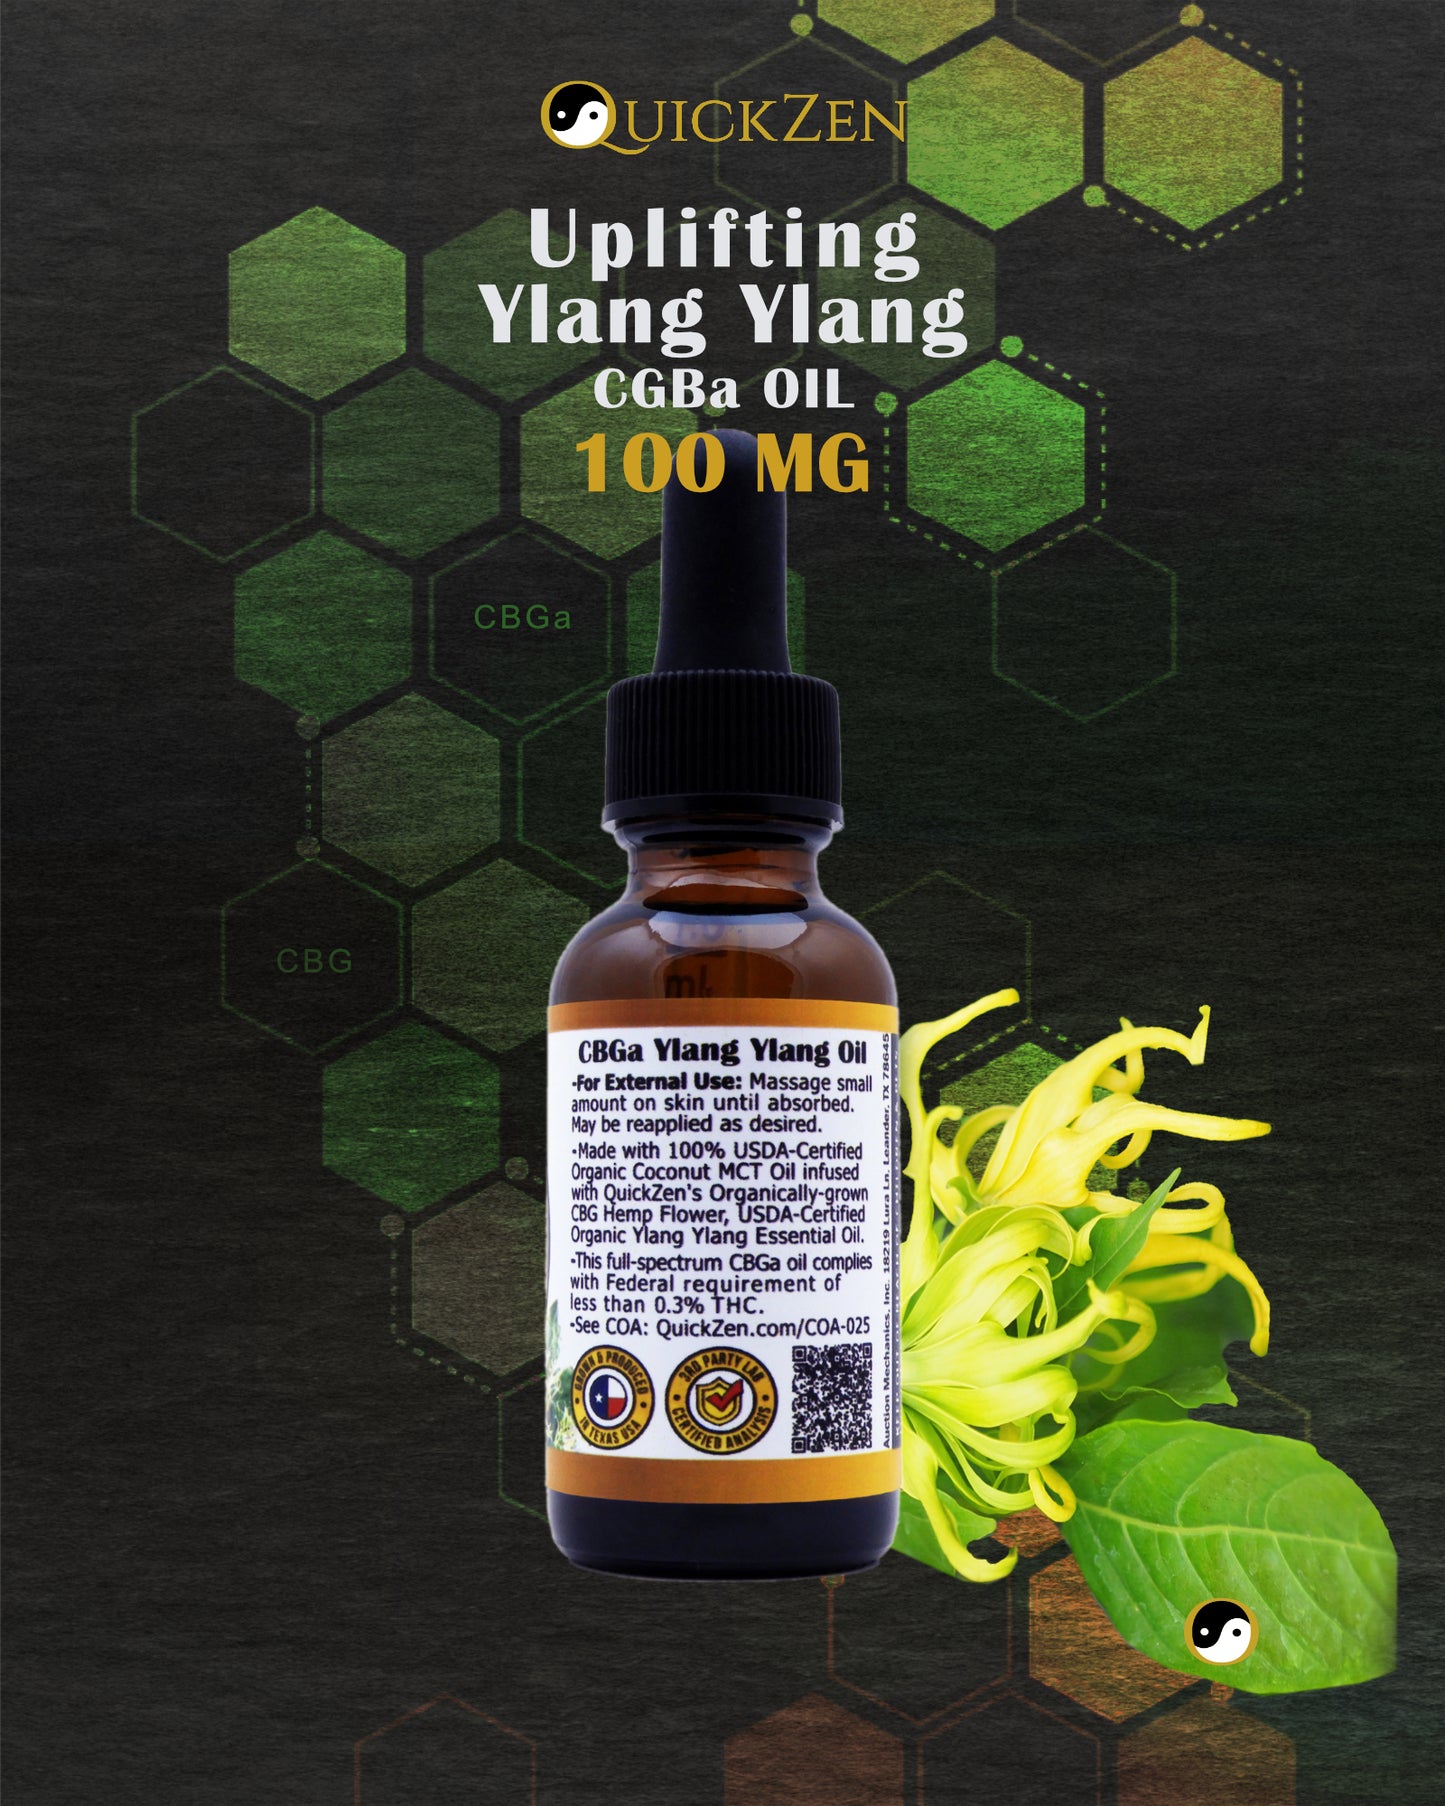 Rear view one ounce bottle of ylang ylang CBGa oil, 100 milligrams. With a lang lang flower. Green molecule icons in the background.